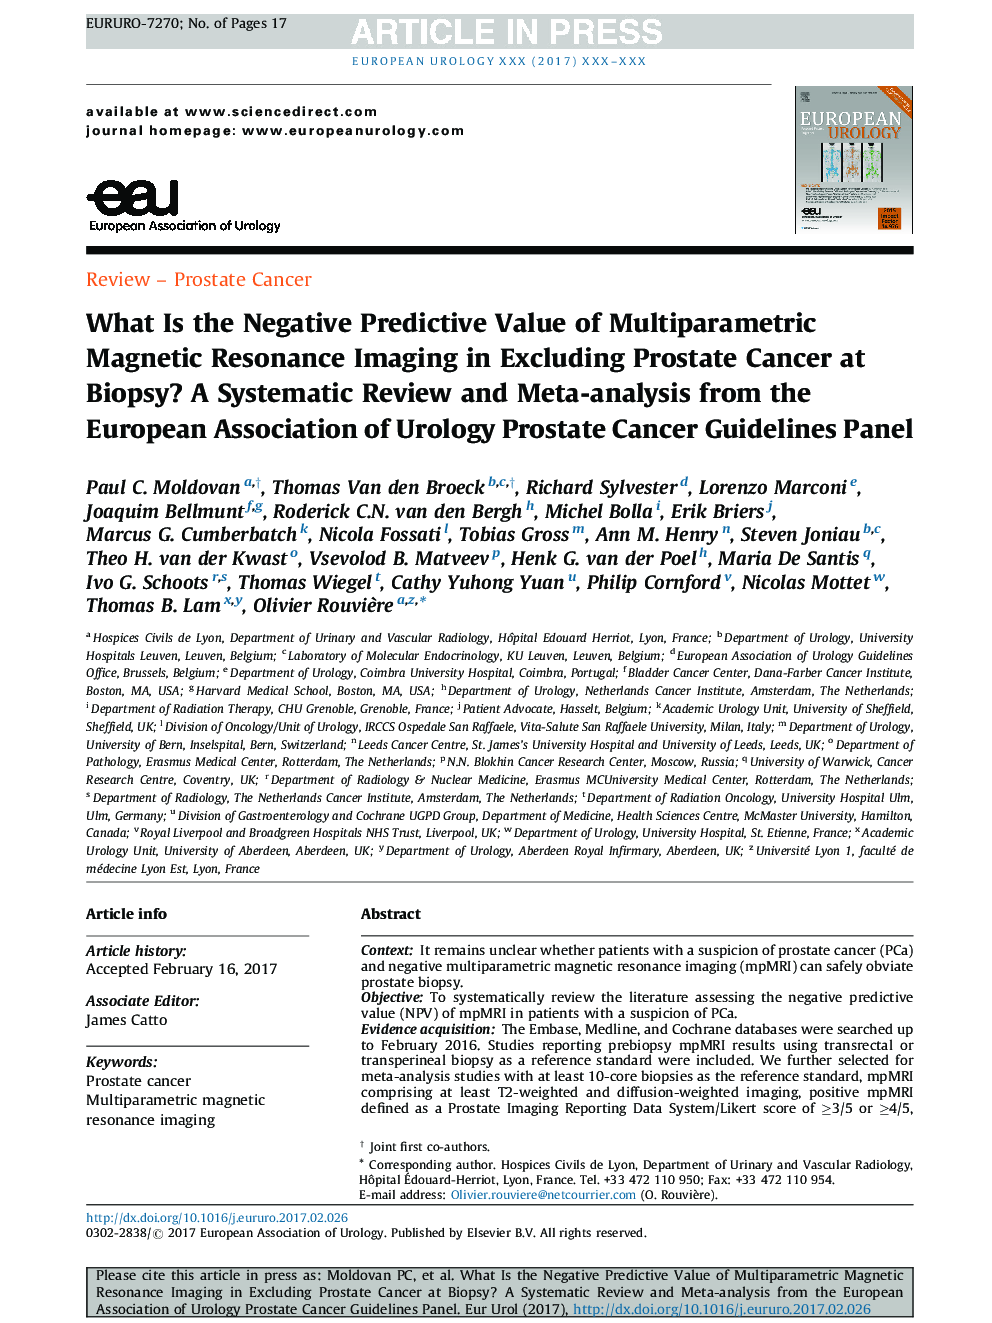 What Is the Negative Predictive Value of Multiparametric Magnetic Resonance Imaging in Excluding Prostate Cancer at Biopsy? A Systematic Review and Meta-analysis from the European Association of Urology Prostate Cancer Guidelines Panel